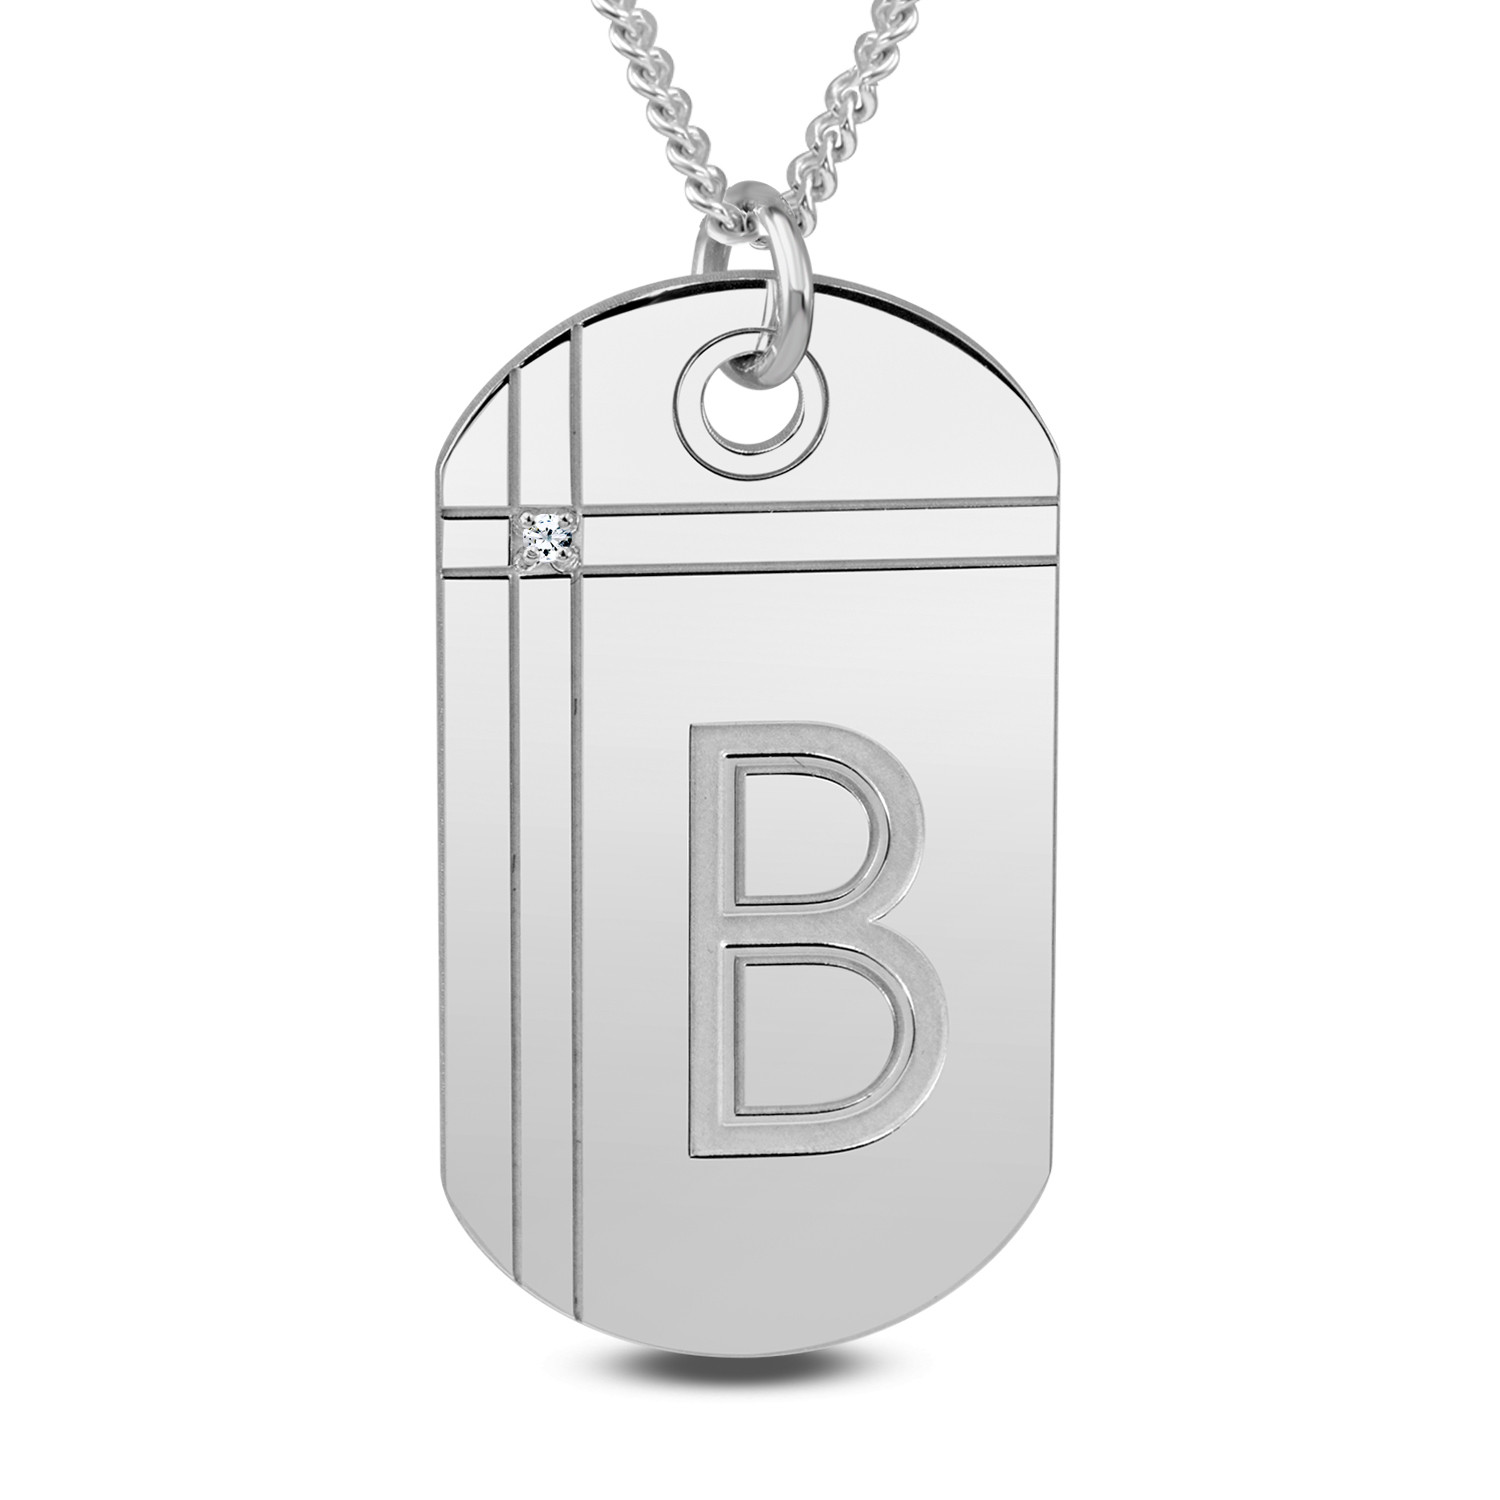 Personalized Gold Dog Tag Pendant - Classic Large Tag Pendant Sterling Silver / Times Roman